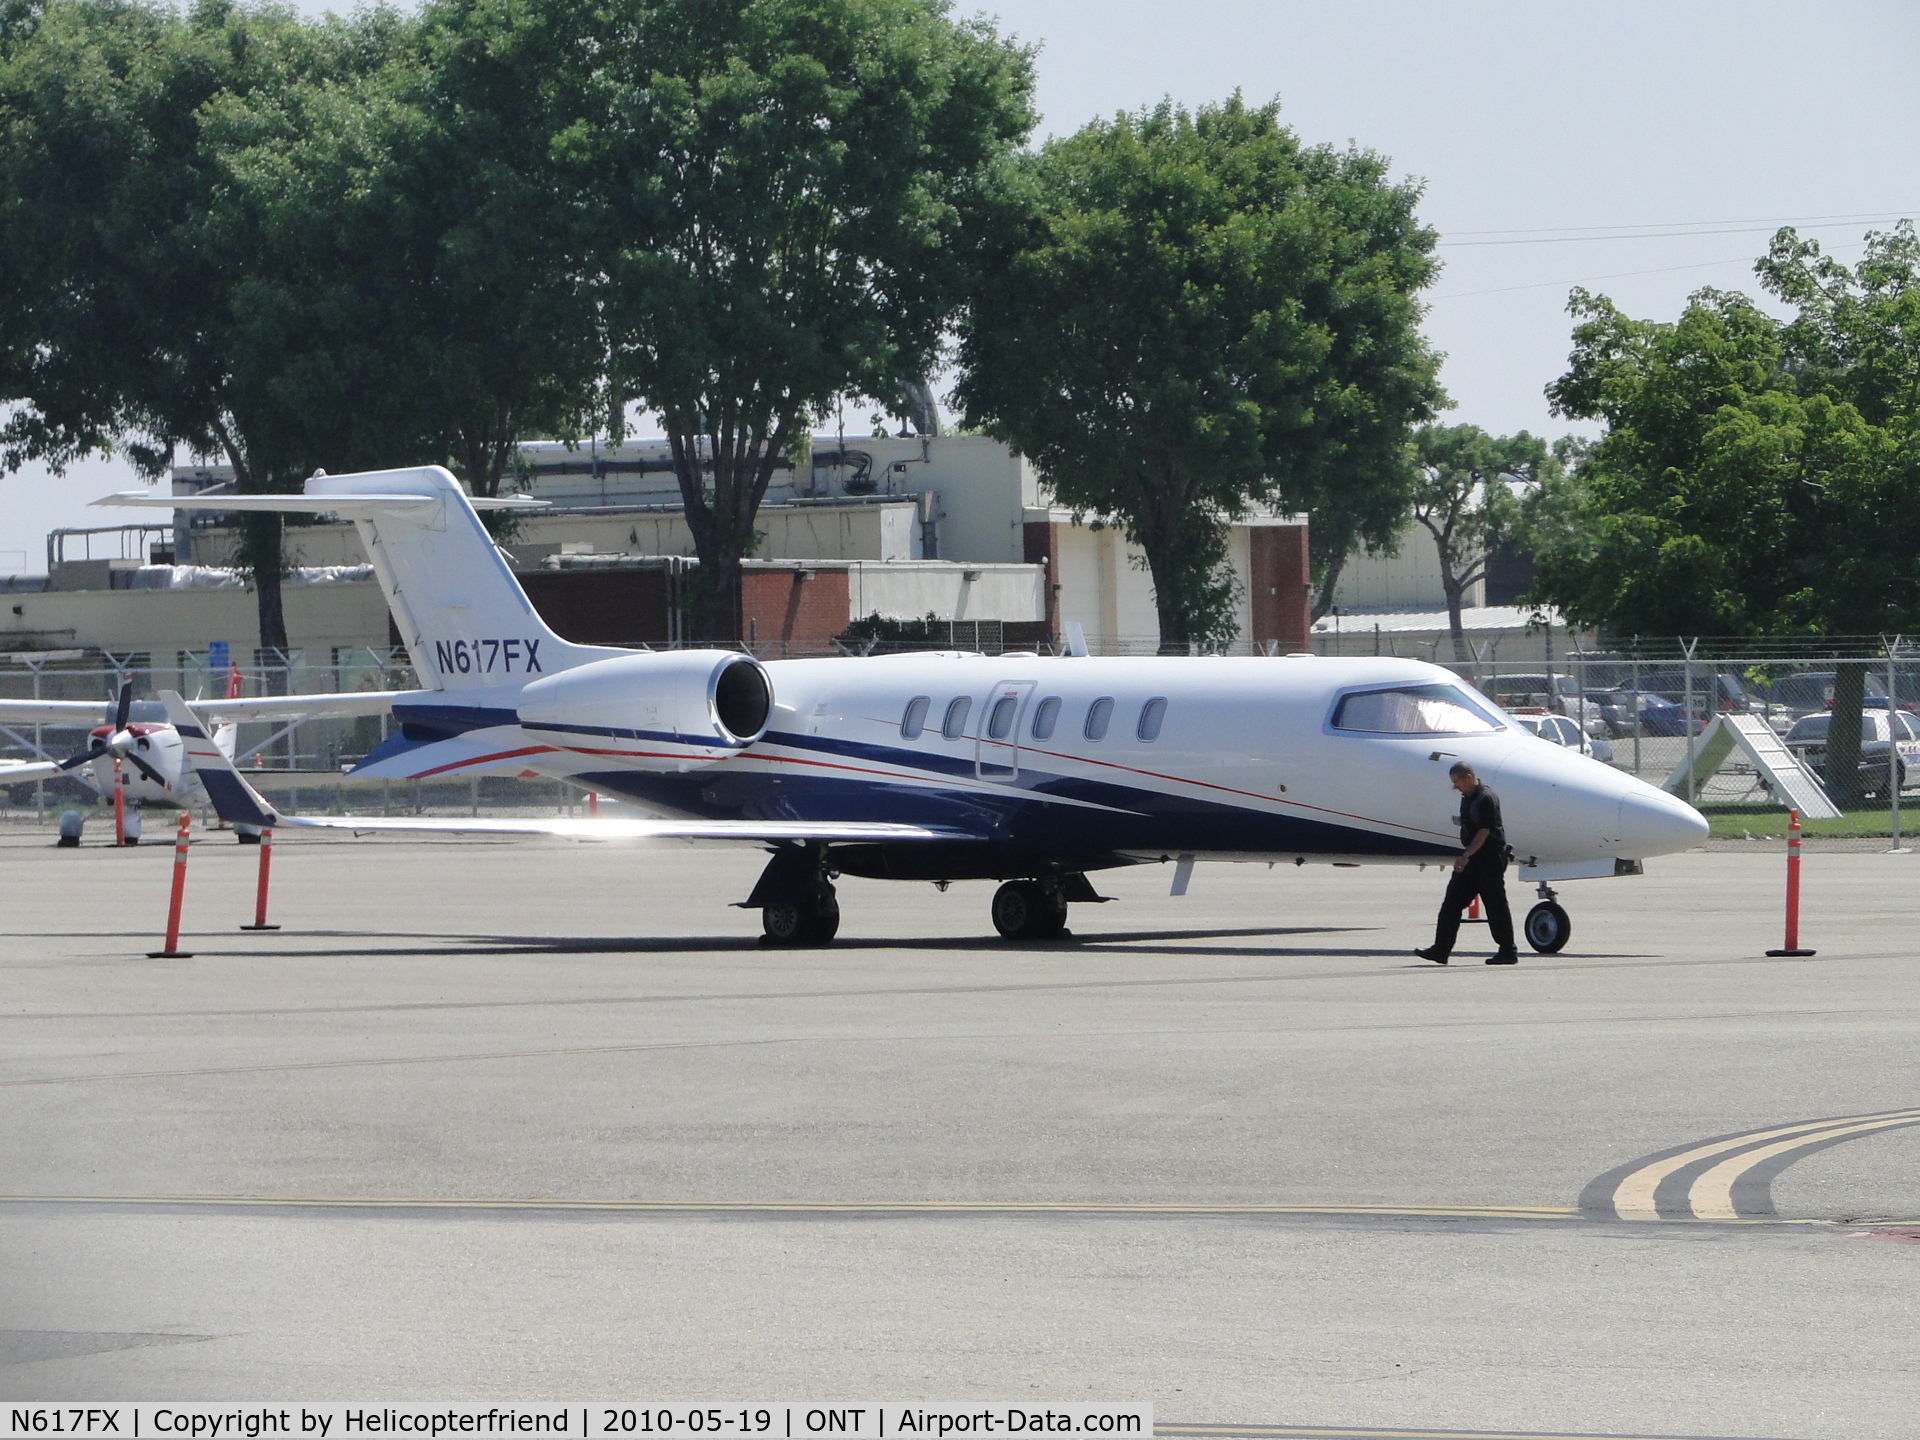 N617FX, 2006 Learjet Inc 45 C/N 2065, Parked at Ontario, and no he's not kicking the tires